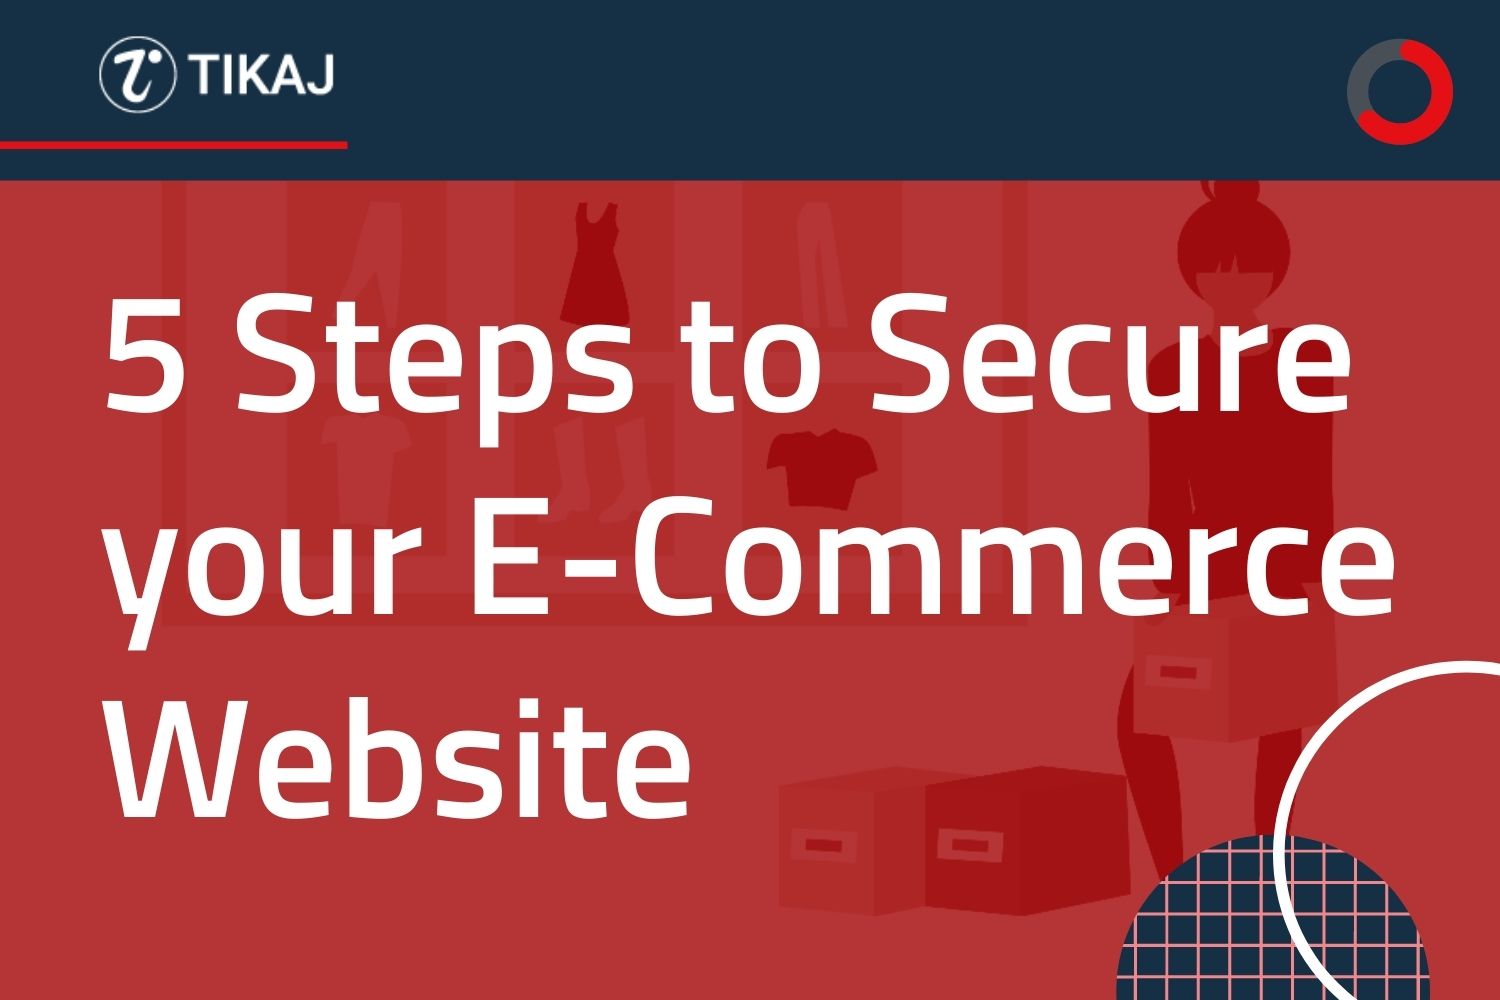 5 Steps your e-commerce website needs today to stay secure